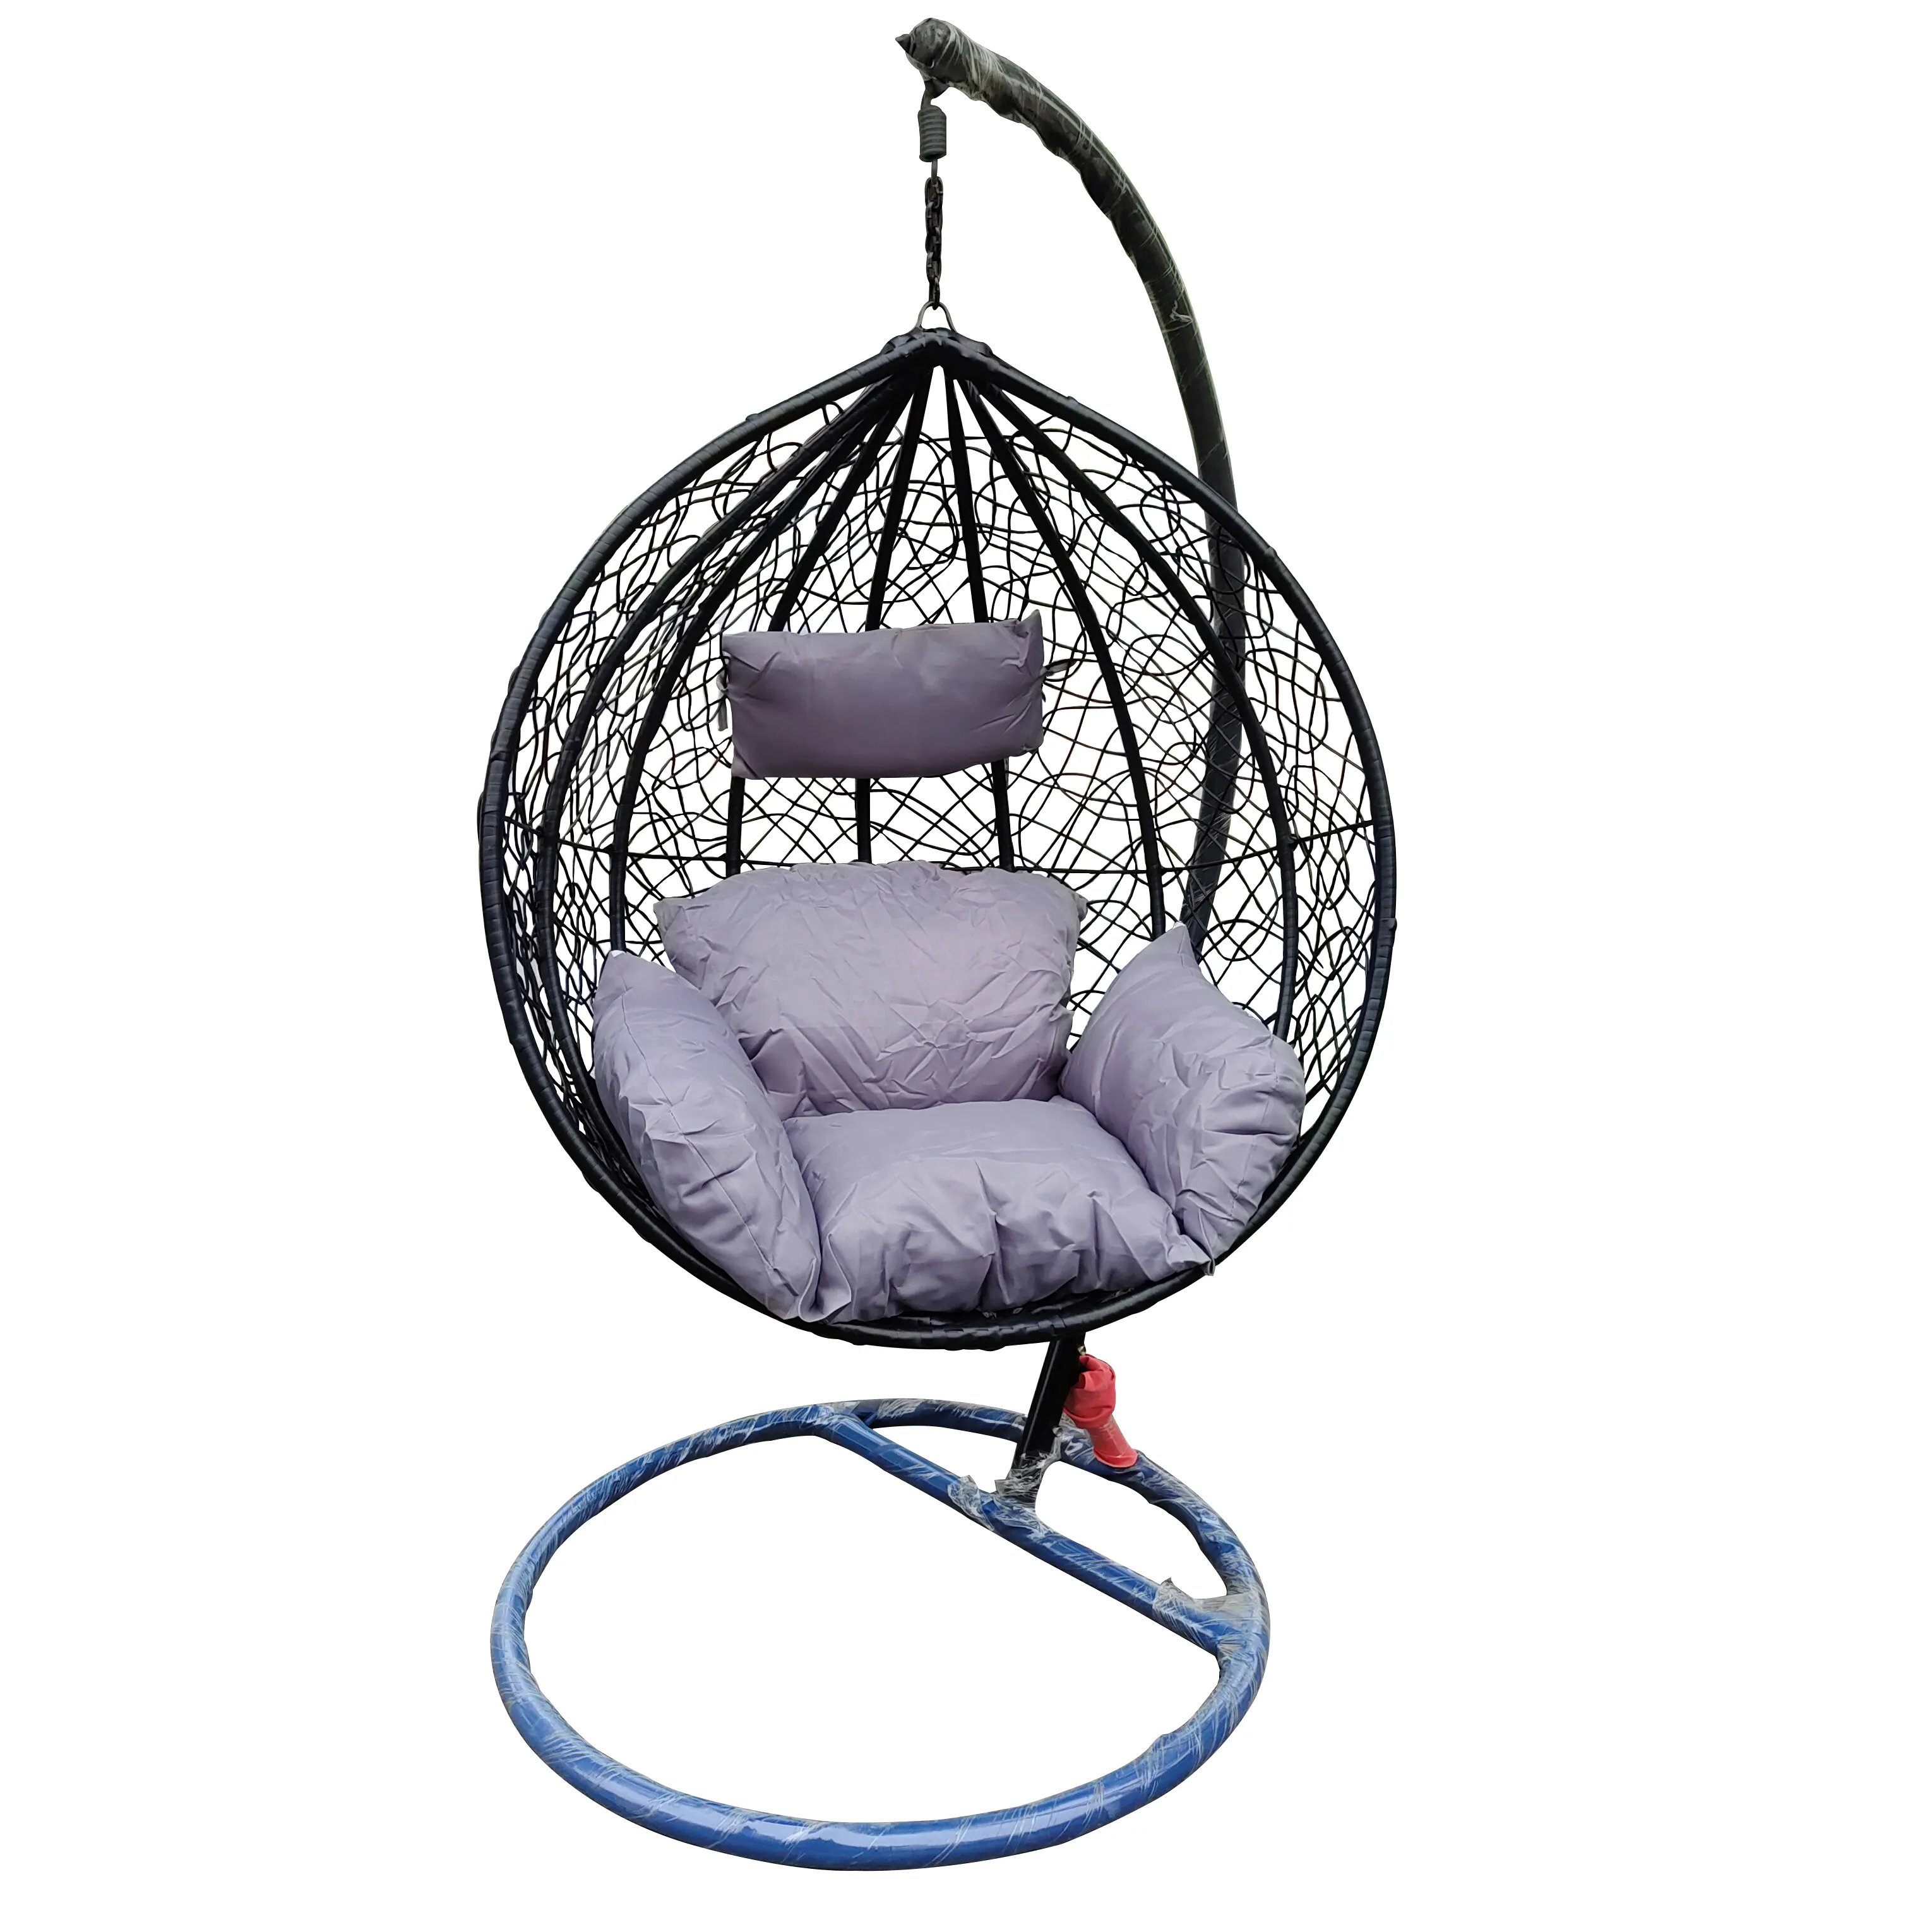 Hanging Chairs For Bedrooms Swings Garden Adults Rocking Chair Swing With Metal Stand Round Hammock